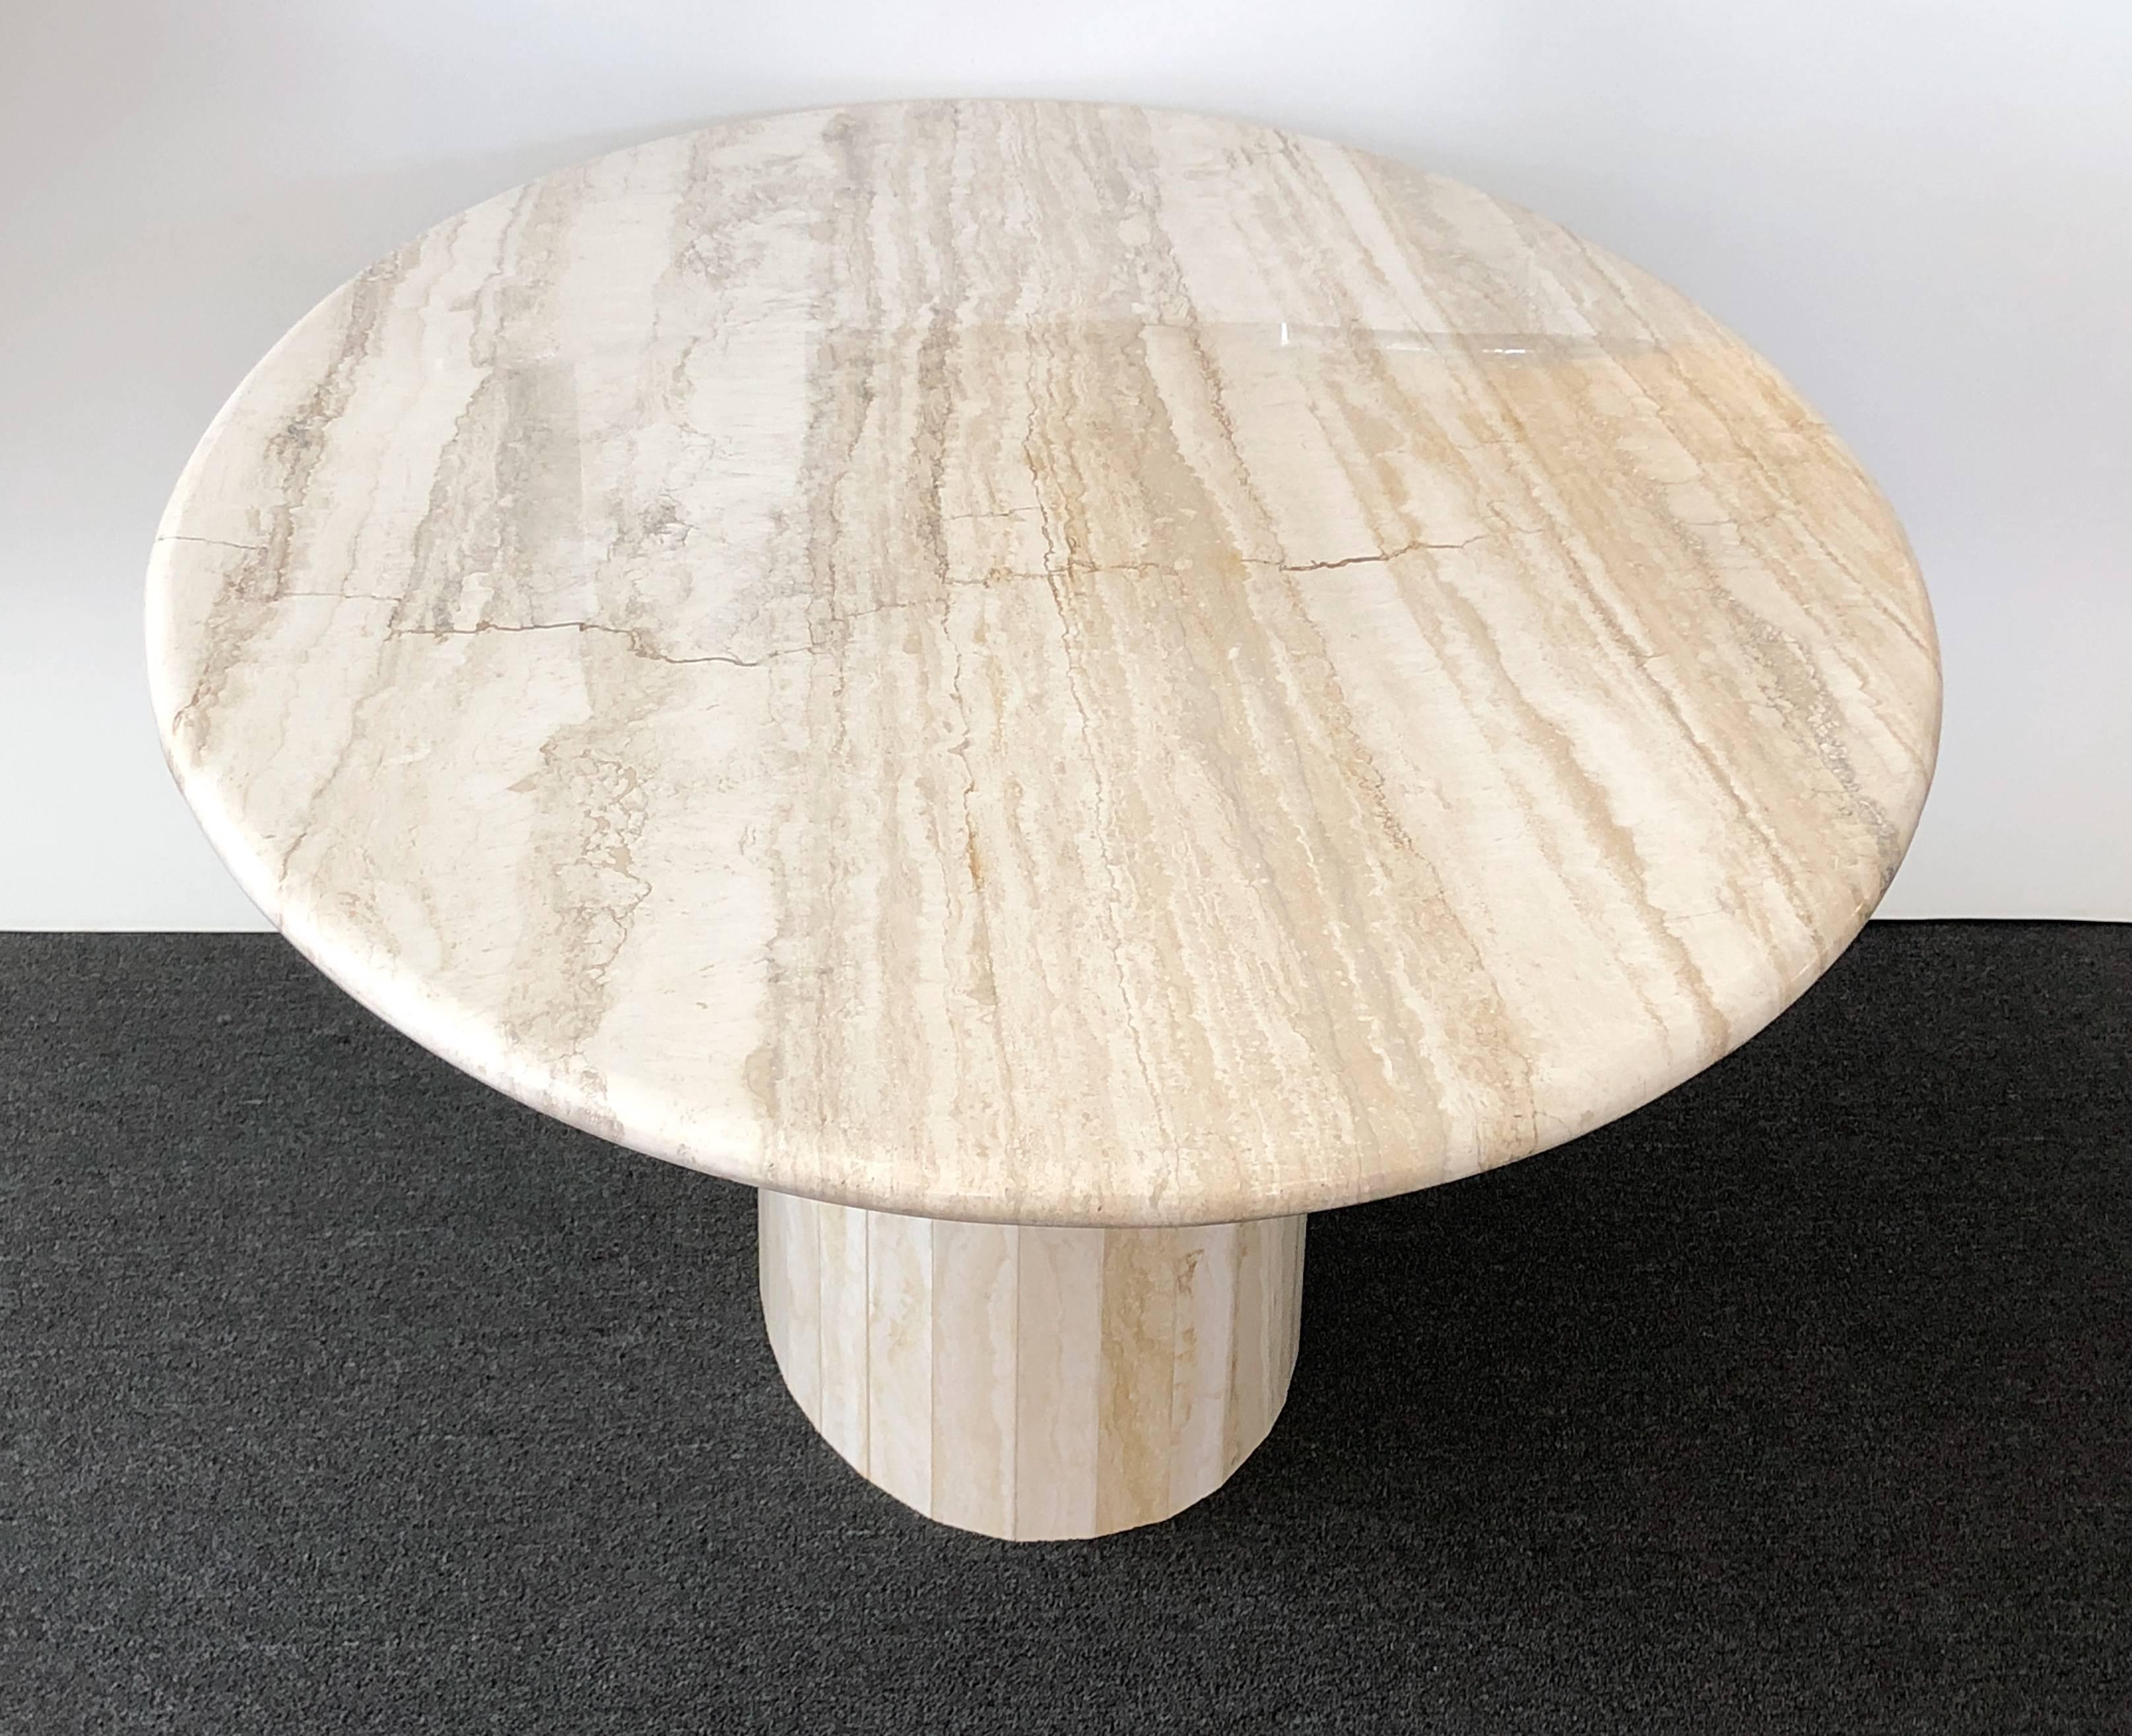 A beautiful Italian travertine oval dining table from the 1970s by Ello.
Seats six people comfortably. Newly professionally polished.
Dimension: 78.5” wide, 47” deep, 28.5” high.